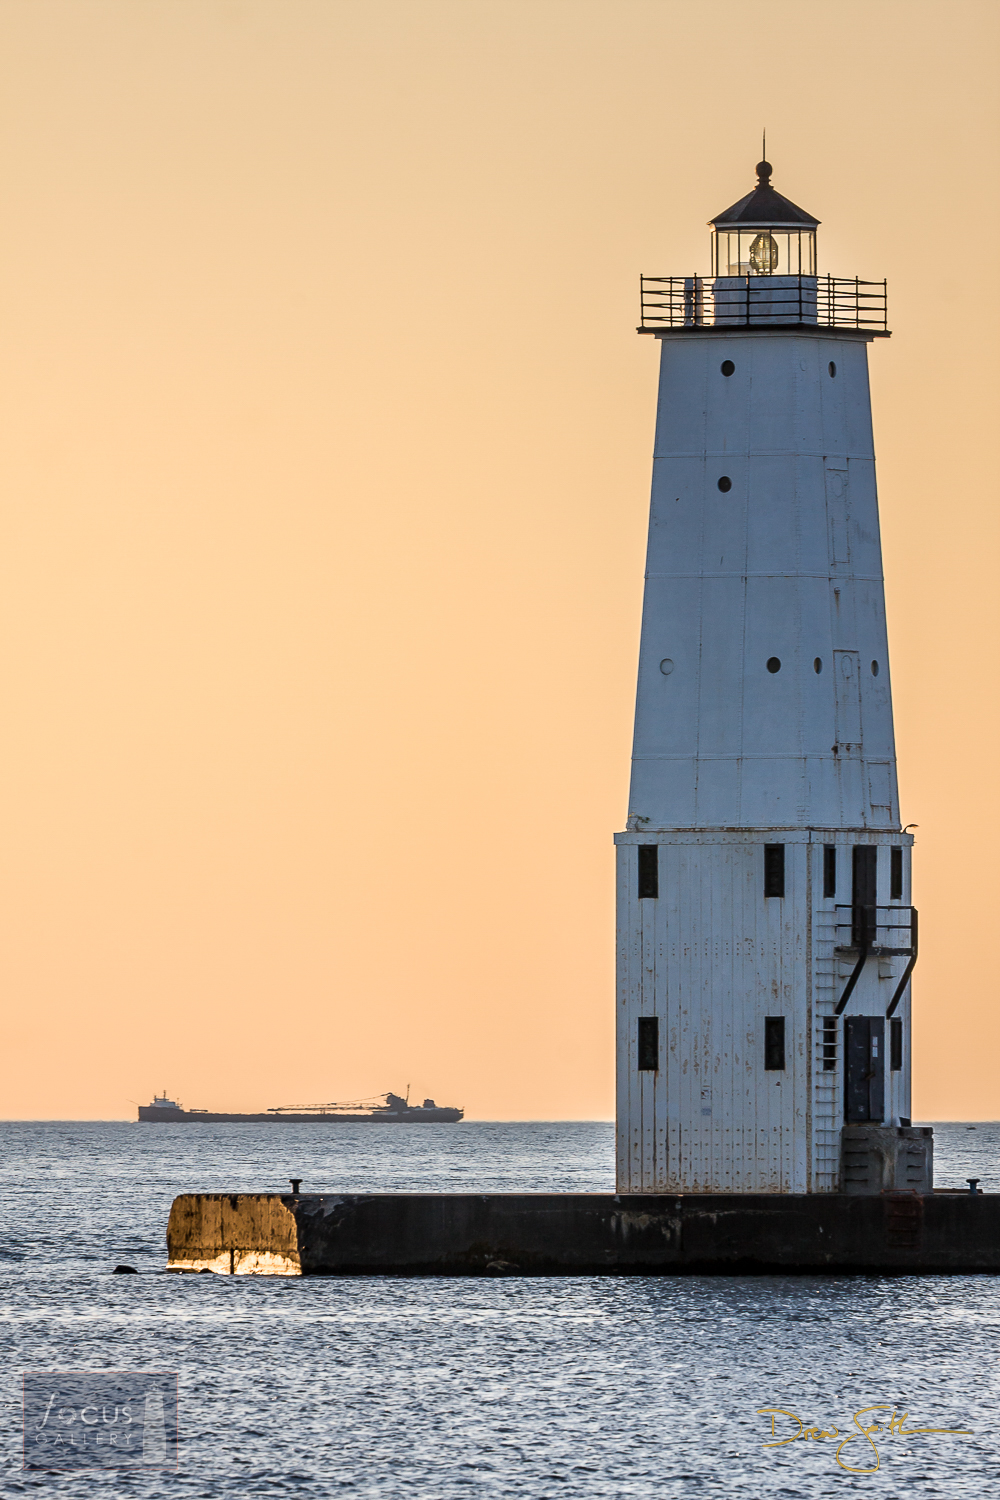 Ore freighter and the Frankfort North Breakwater Lighthouse, a classic Great Lakes image